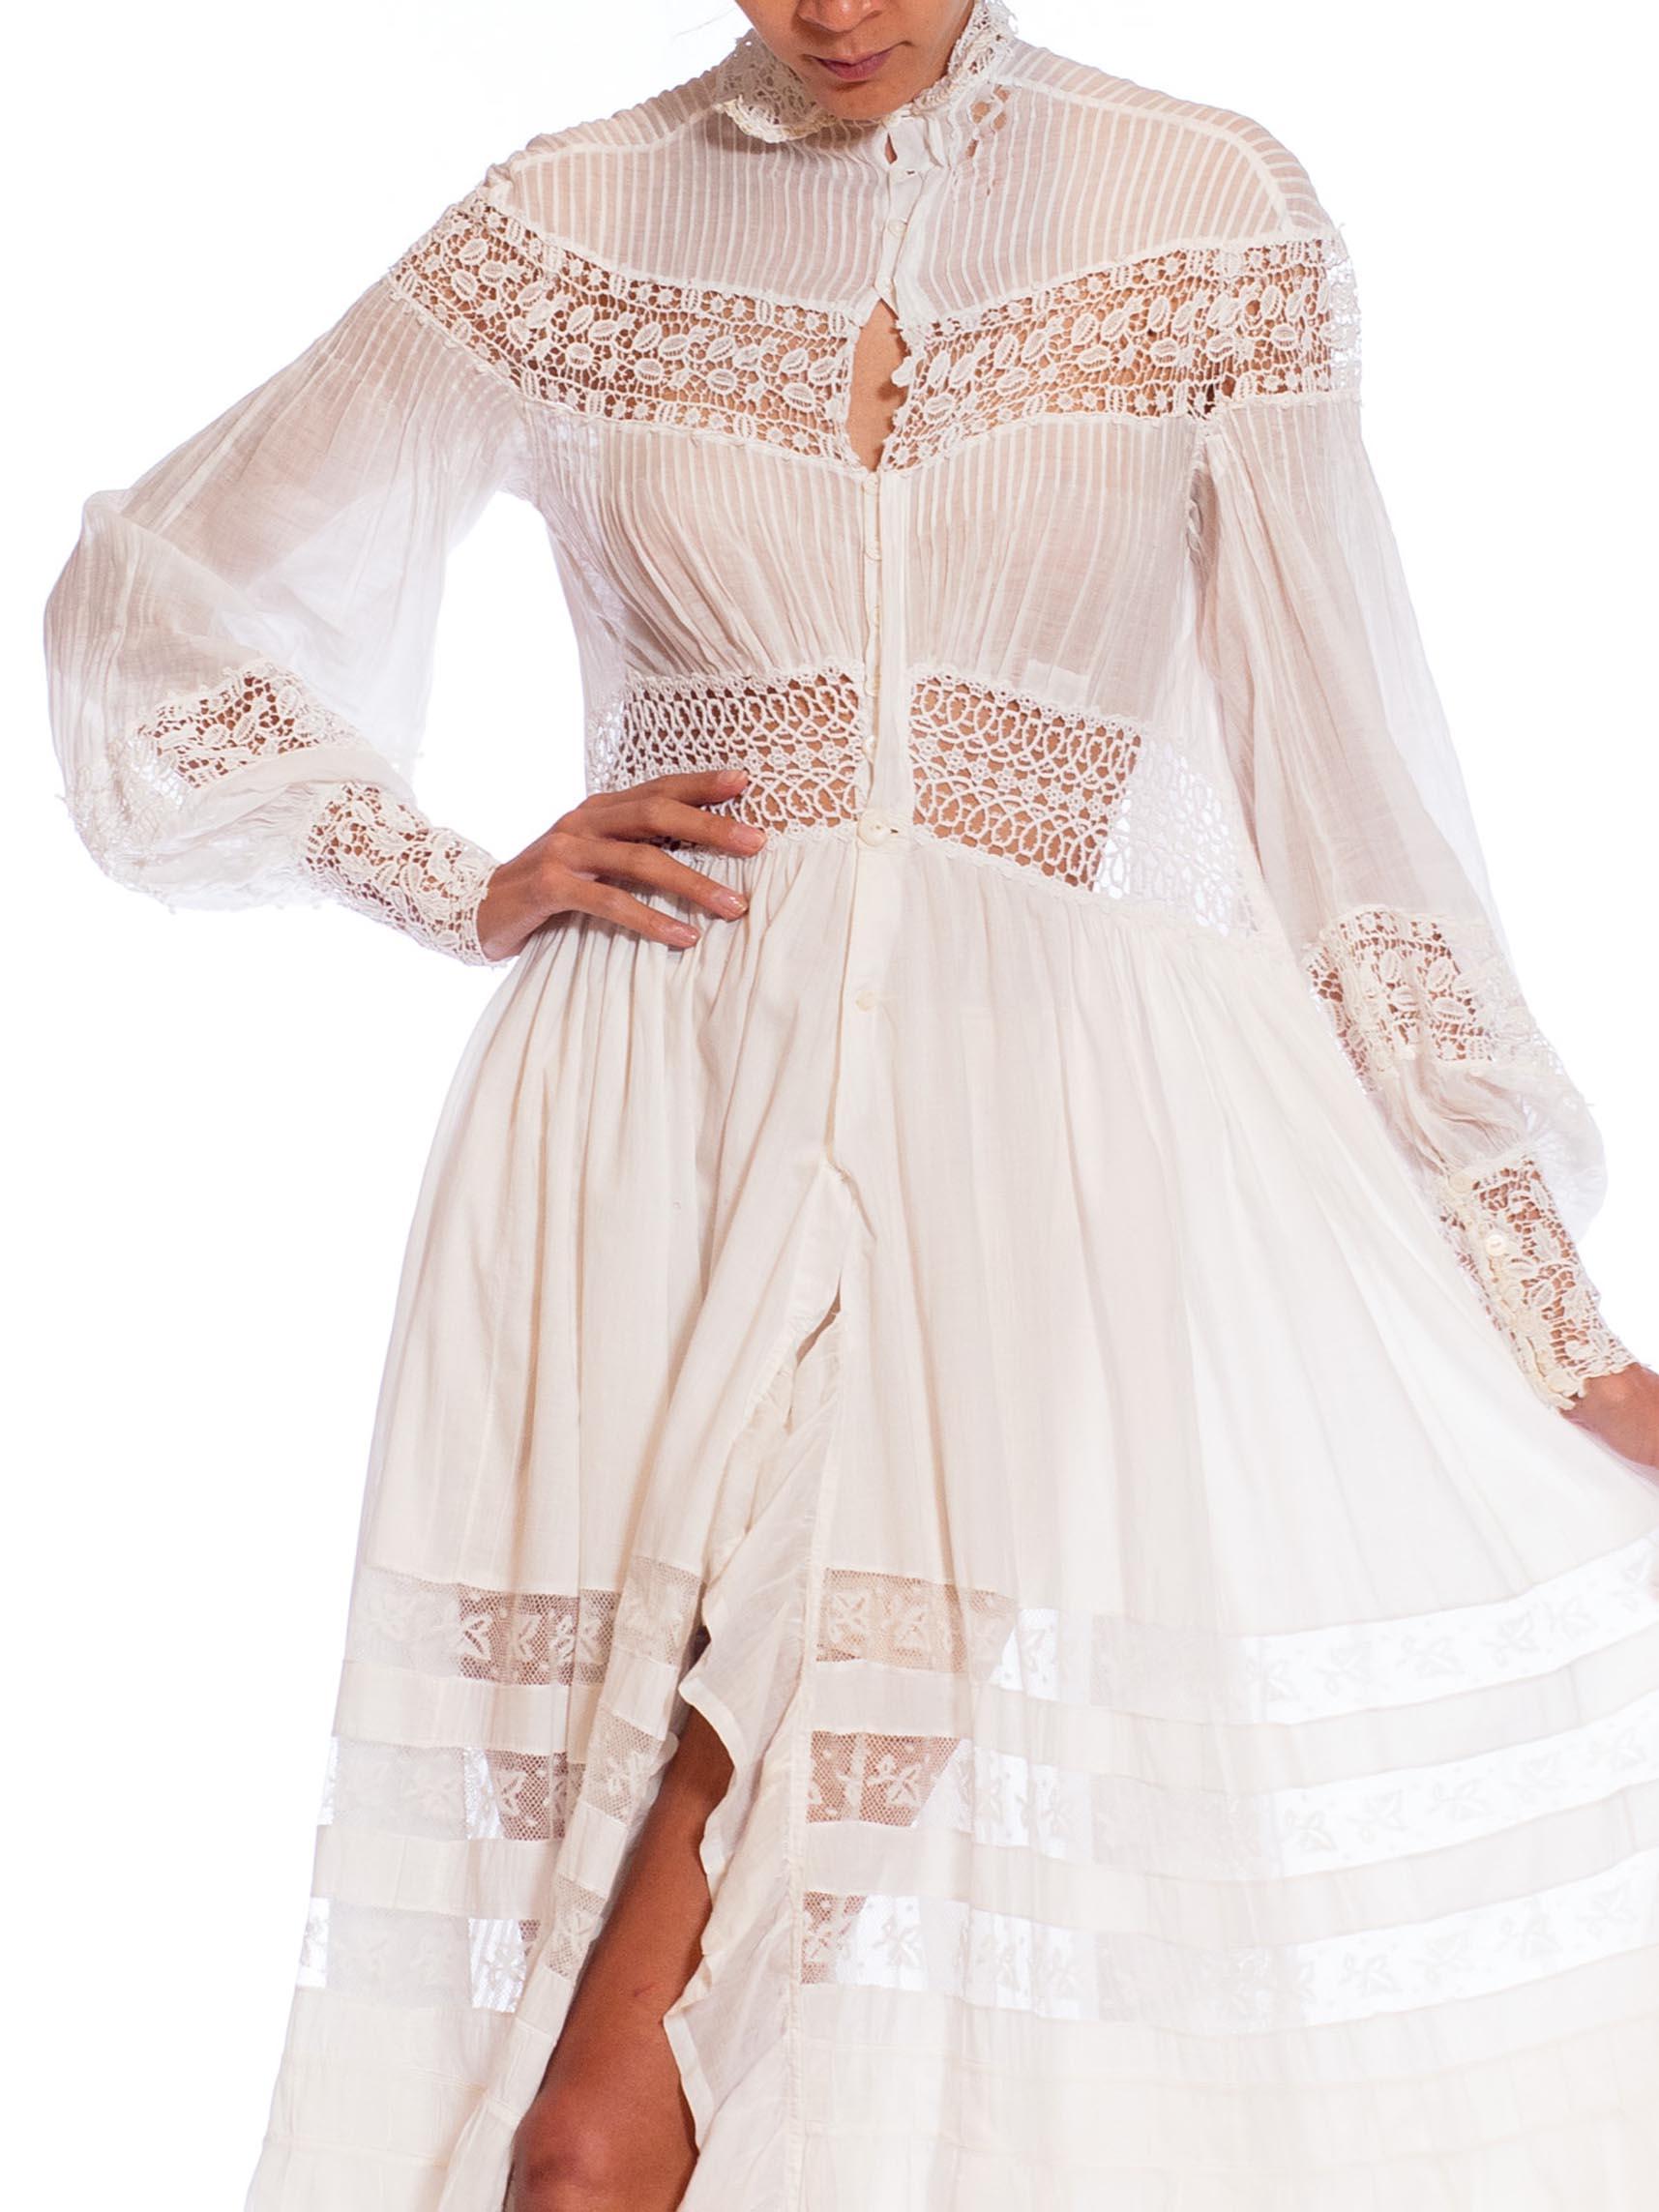 Morphew Atelier White Victorian Cotton & Lace Oversized Gown For Sale 2